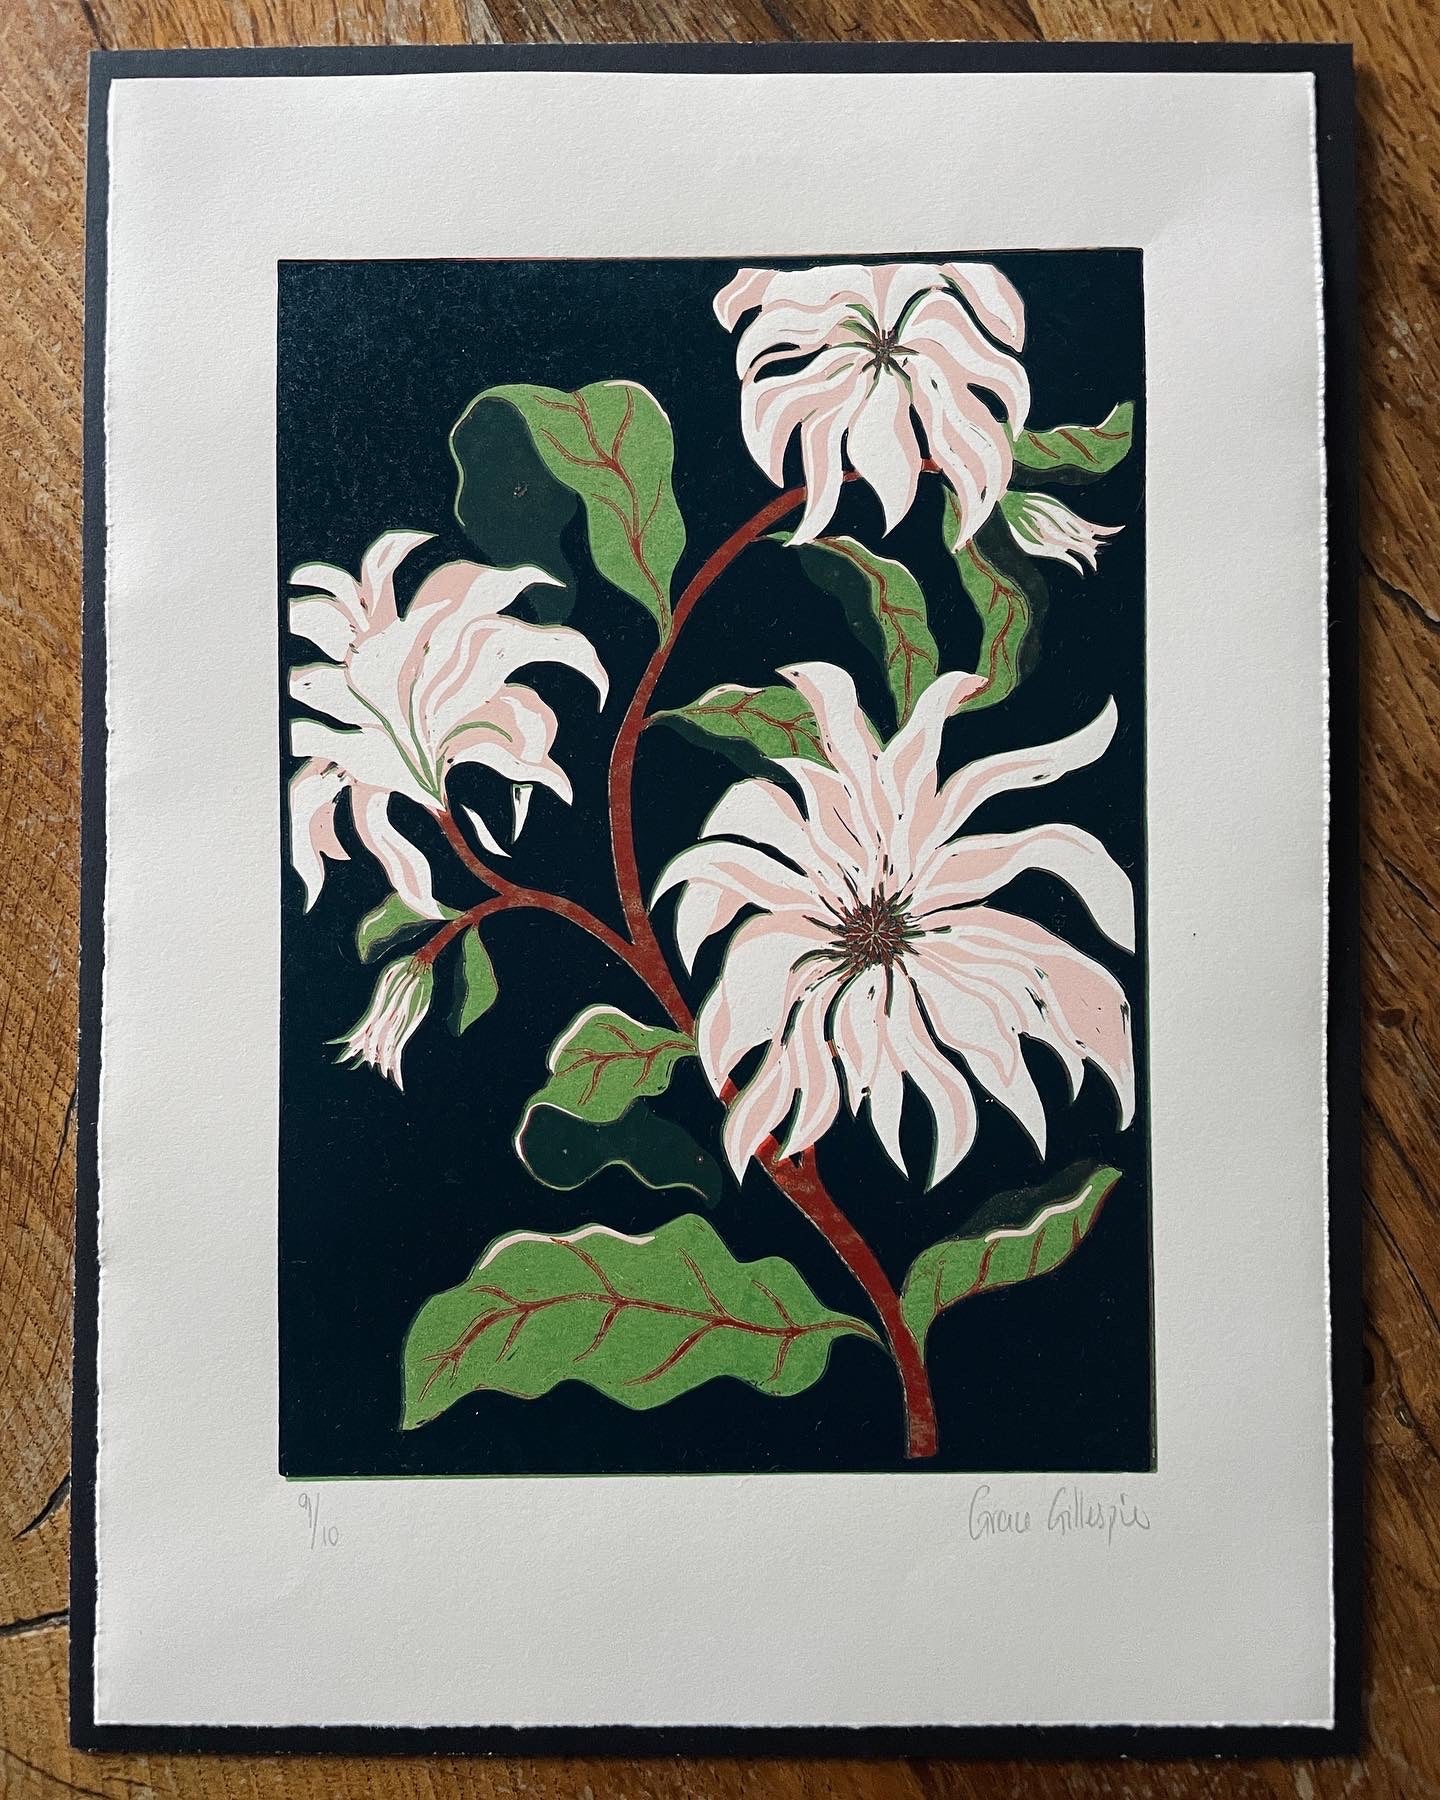 'Small Dahlia' reduction linoprint, by Grace Gillespie. Floral wall print in pink and green on a black background.